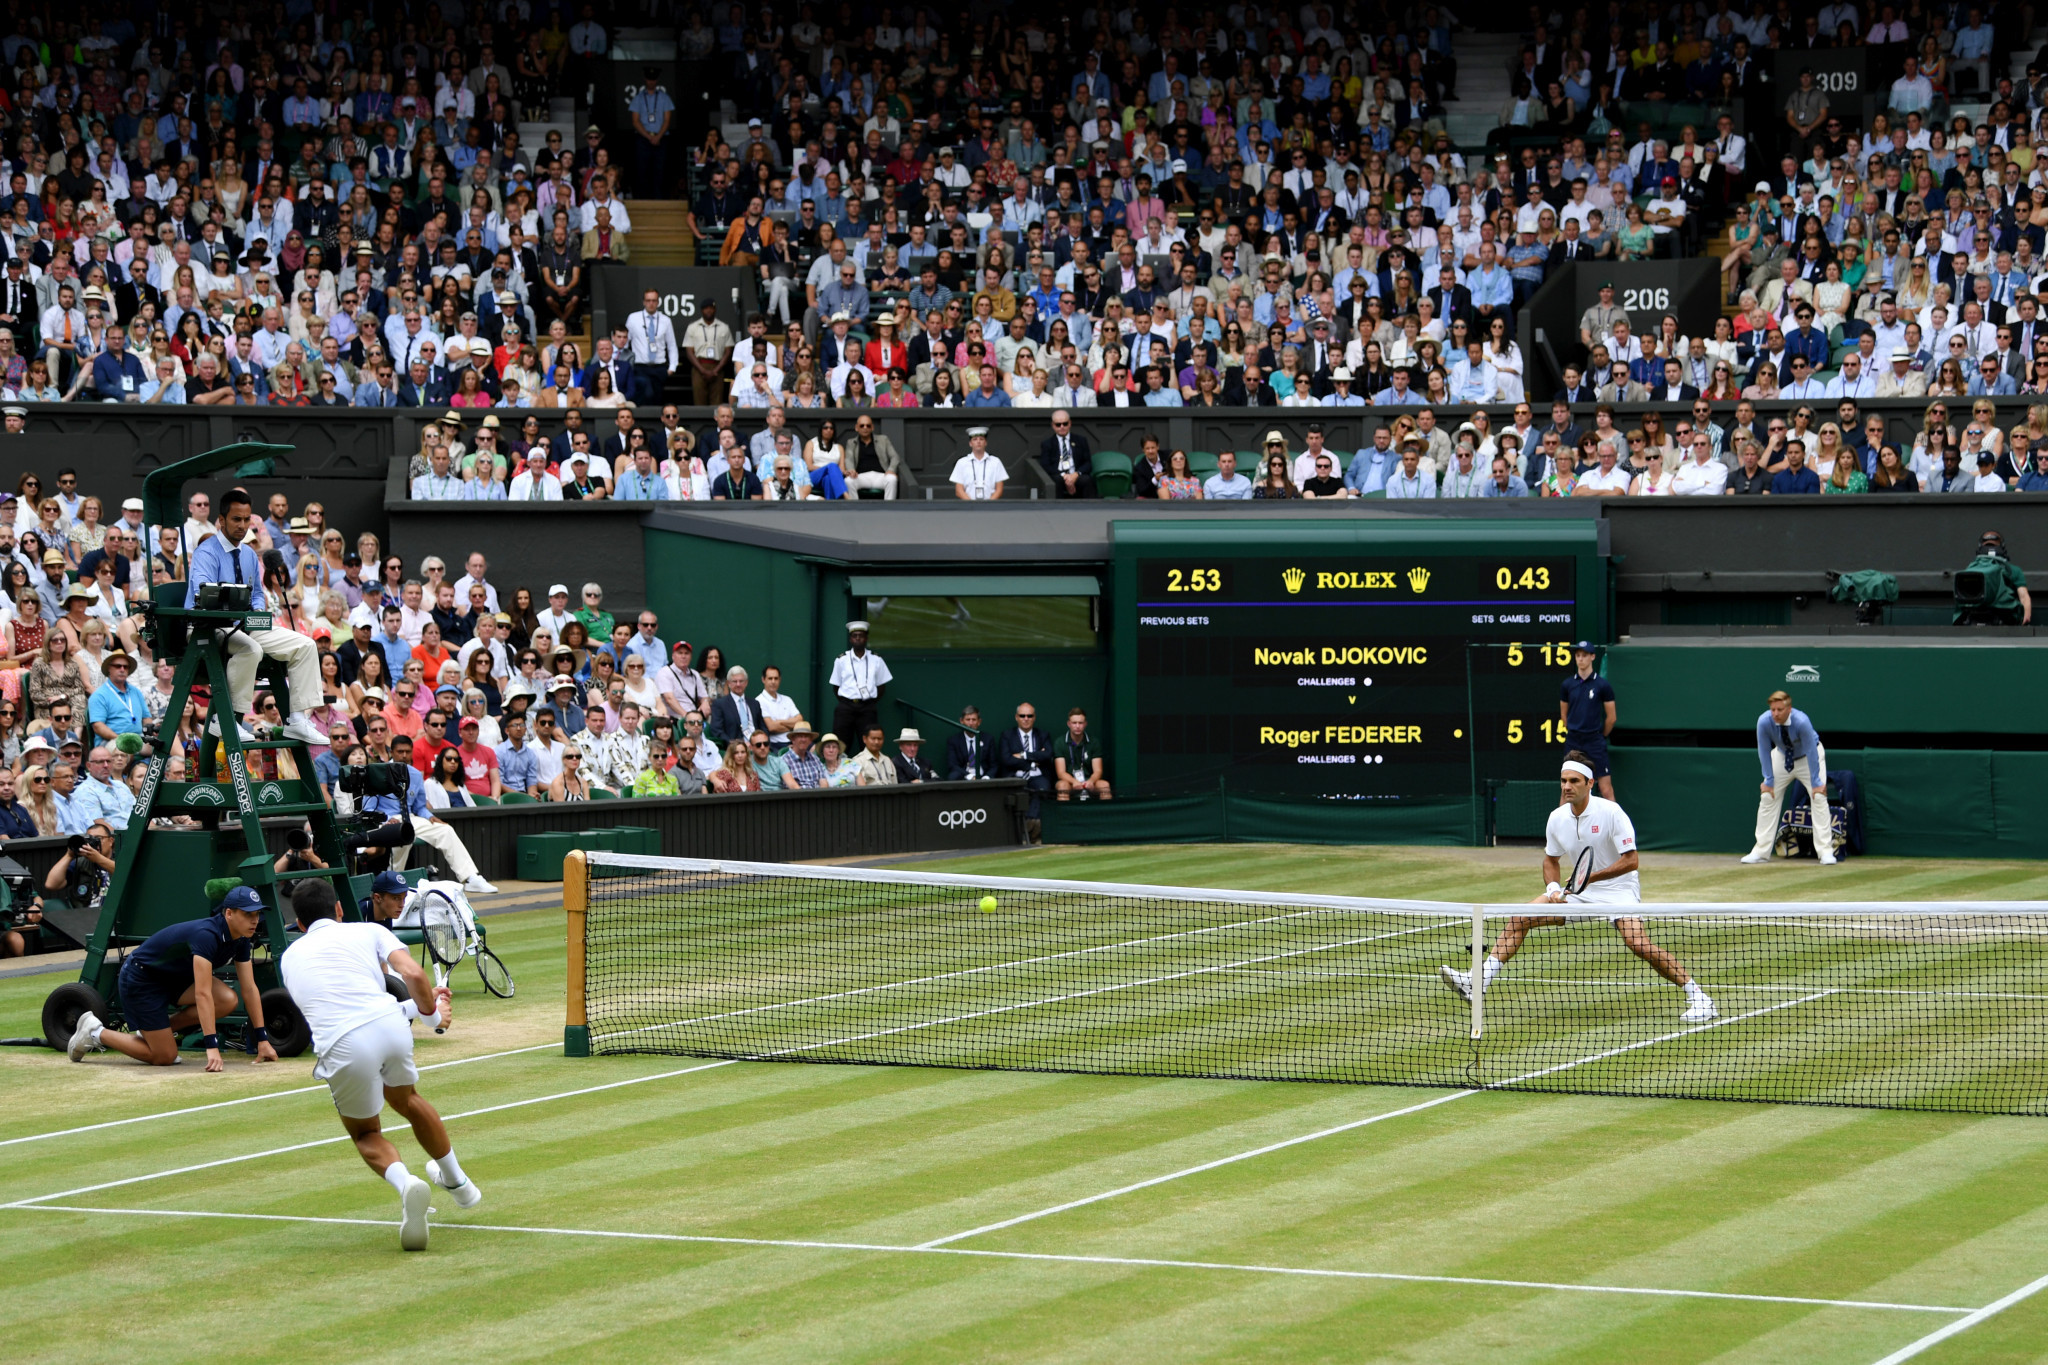 Centre Court tickets at next year's Wimbledon are among the auction lots ©Getty Images